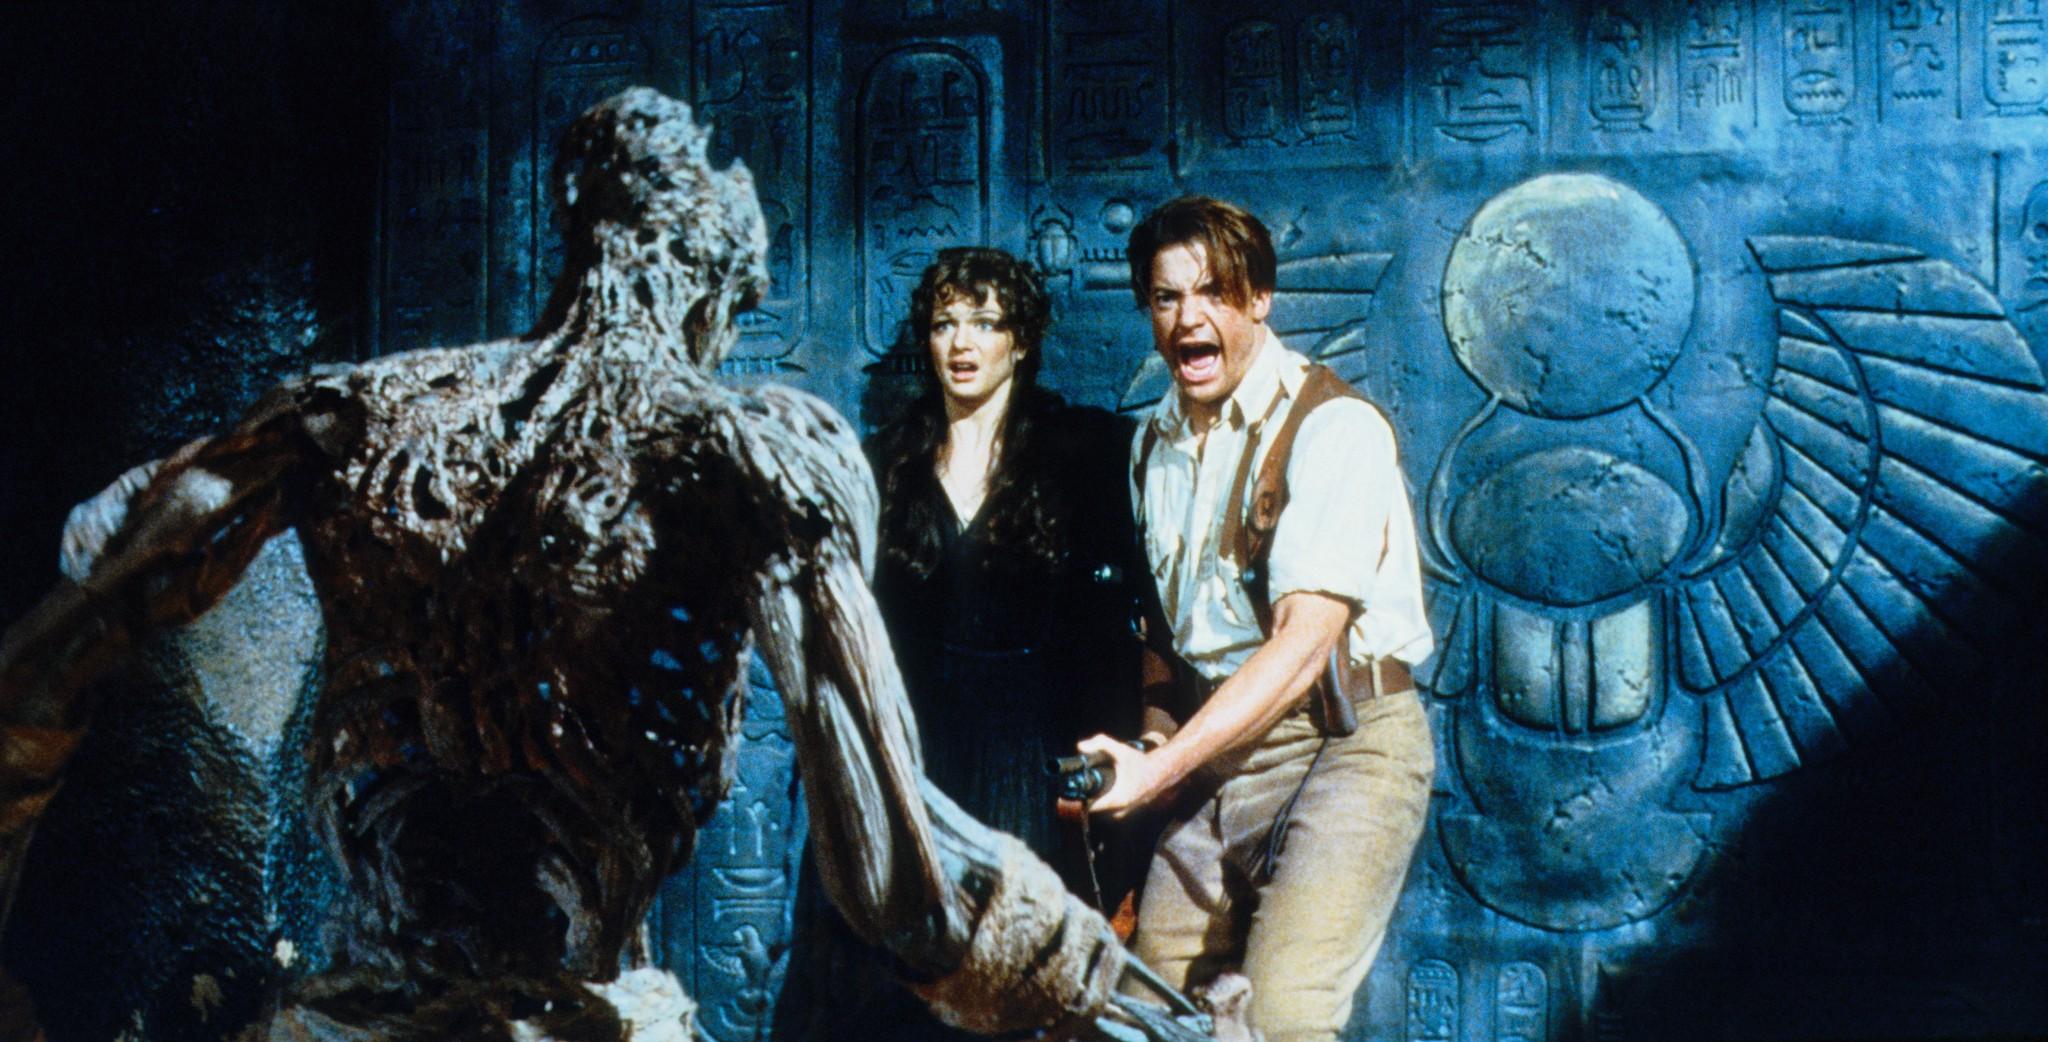 brendan-fraser-and-rachel-weisz-in-the-mummy-_1999_-large-picture.jpg